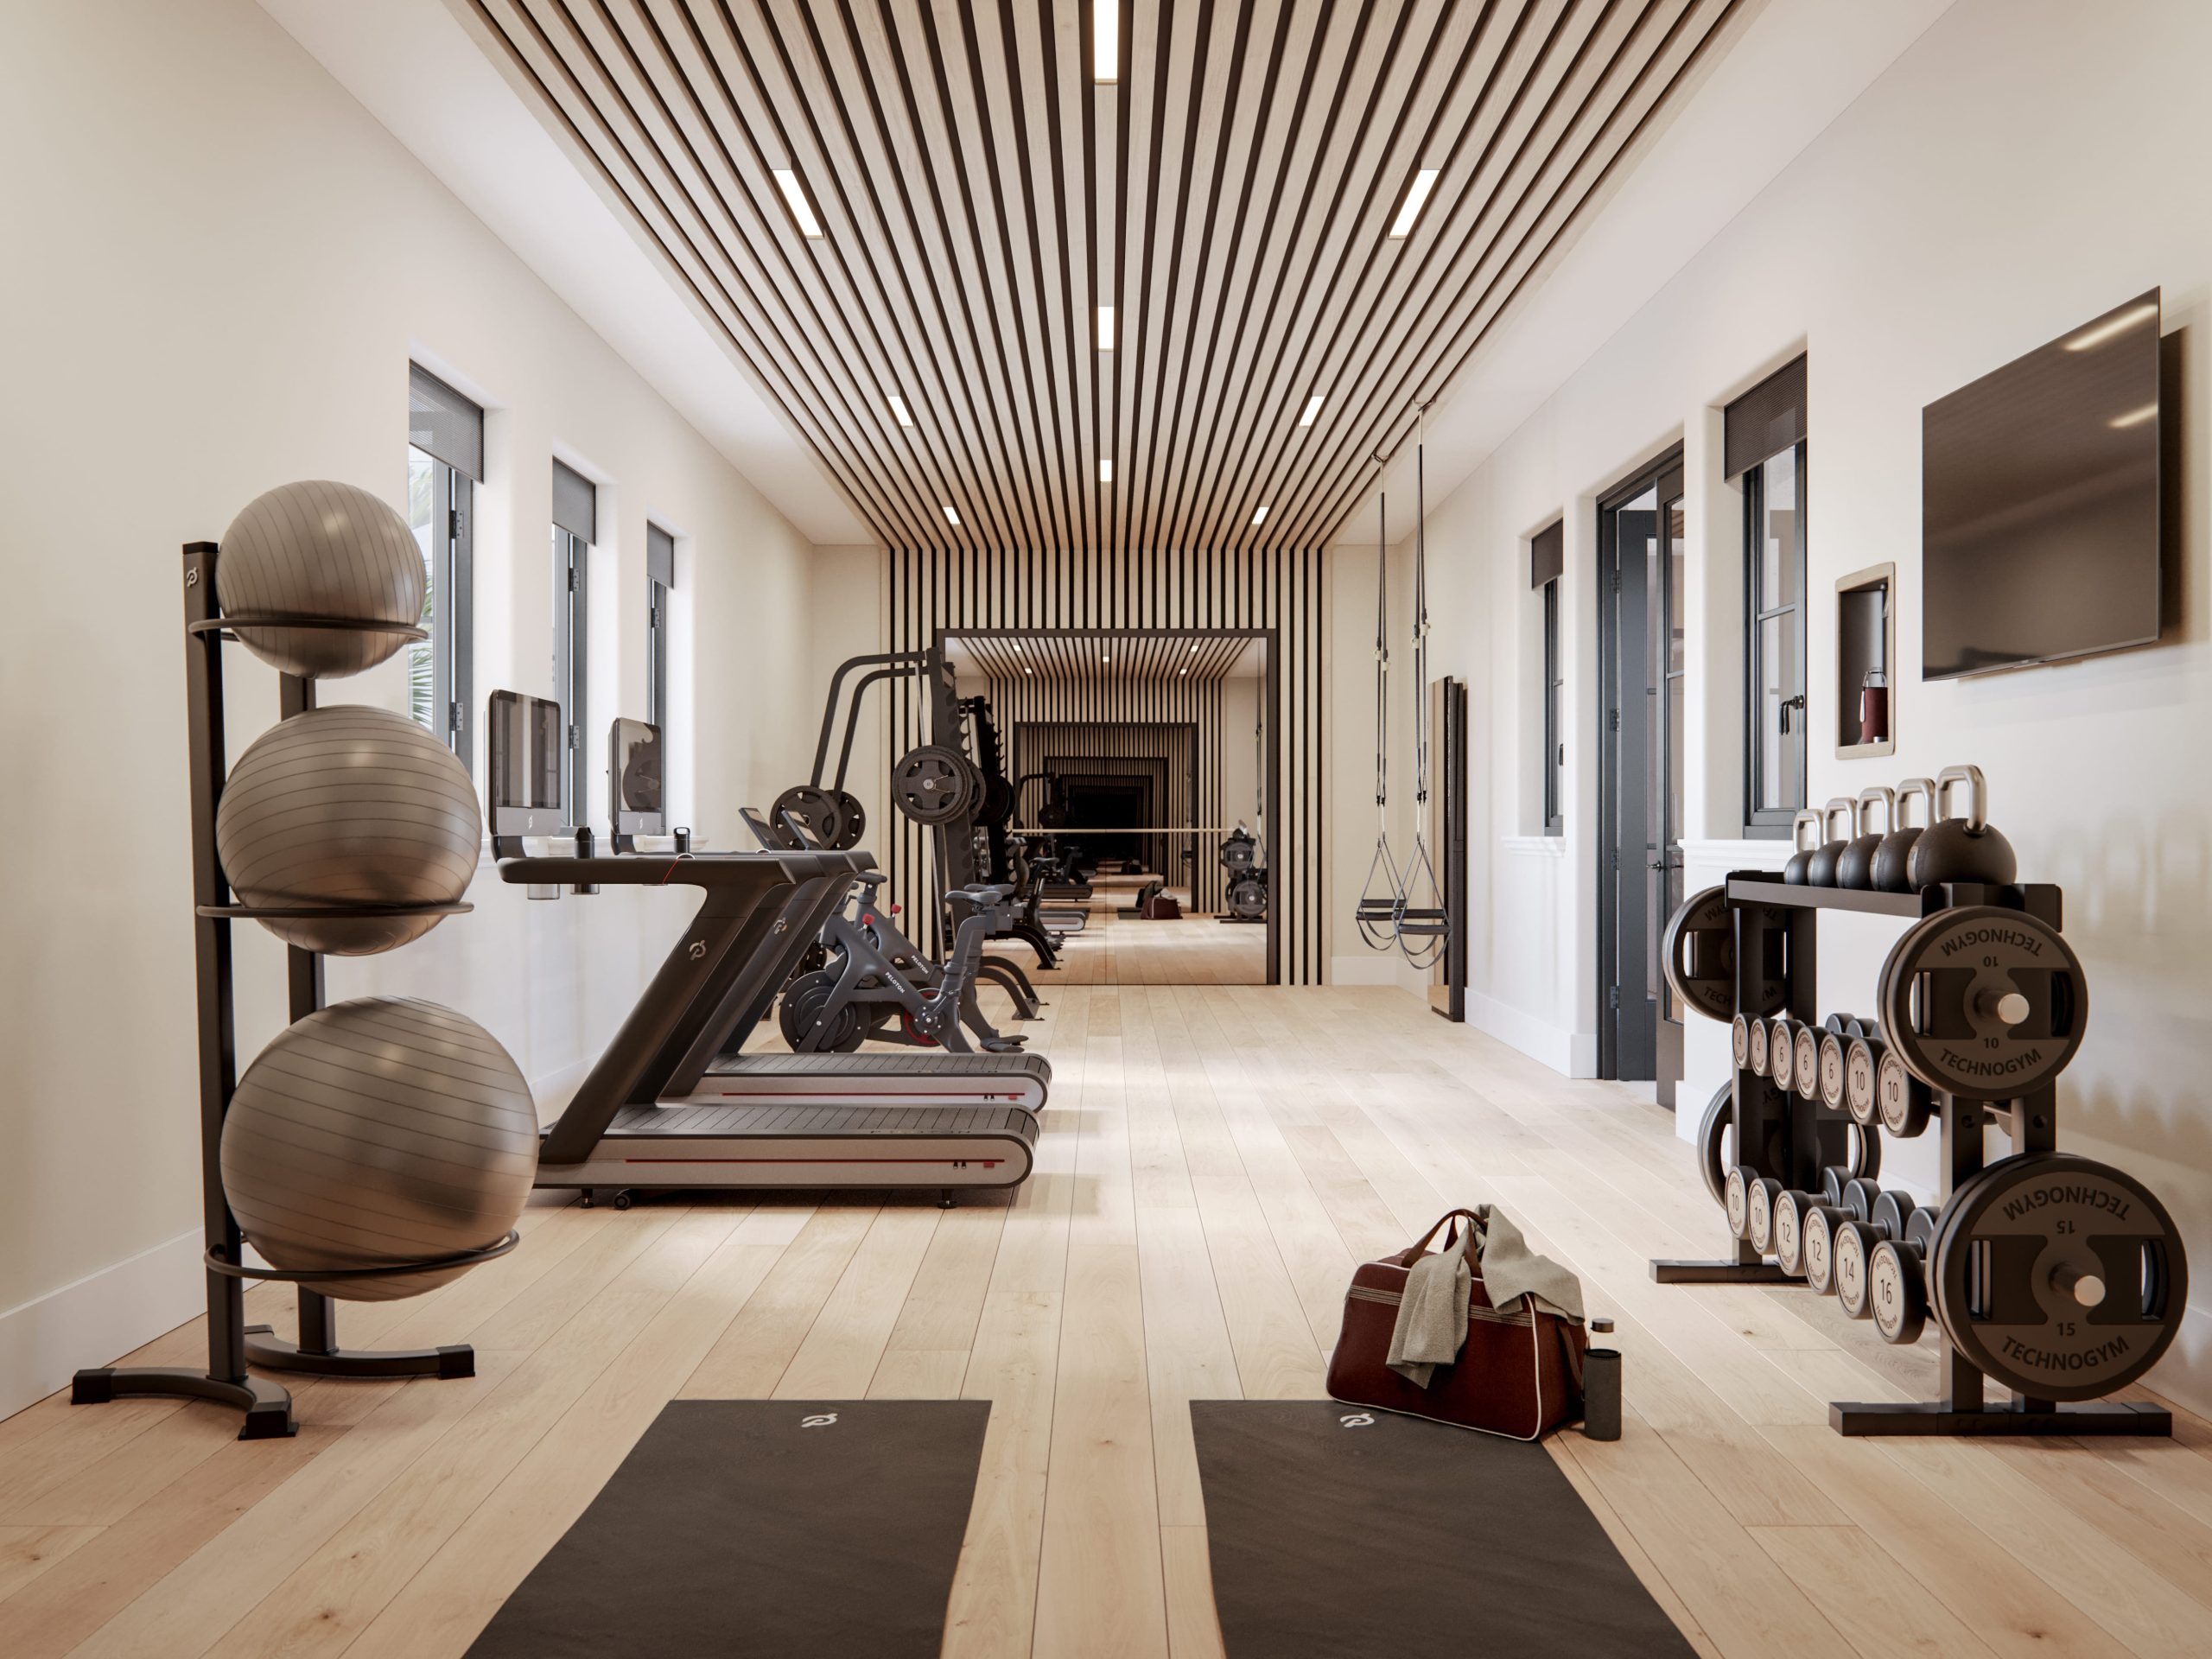 Fitness Center with power Performance Equipment